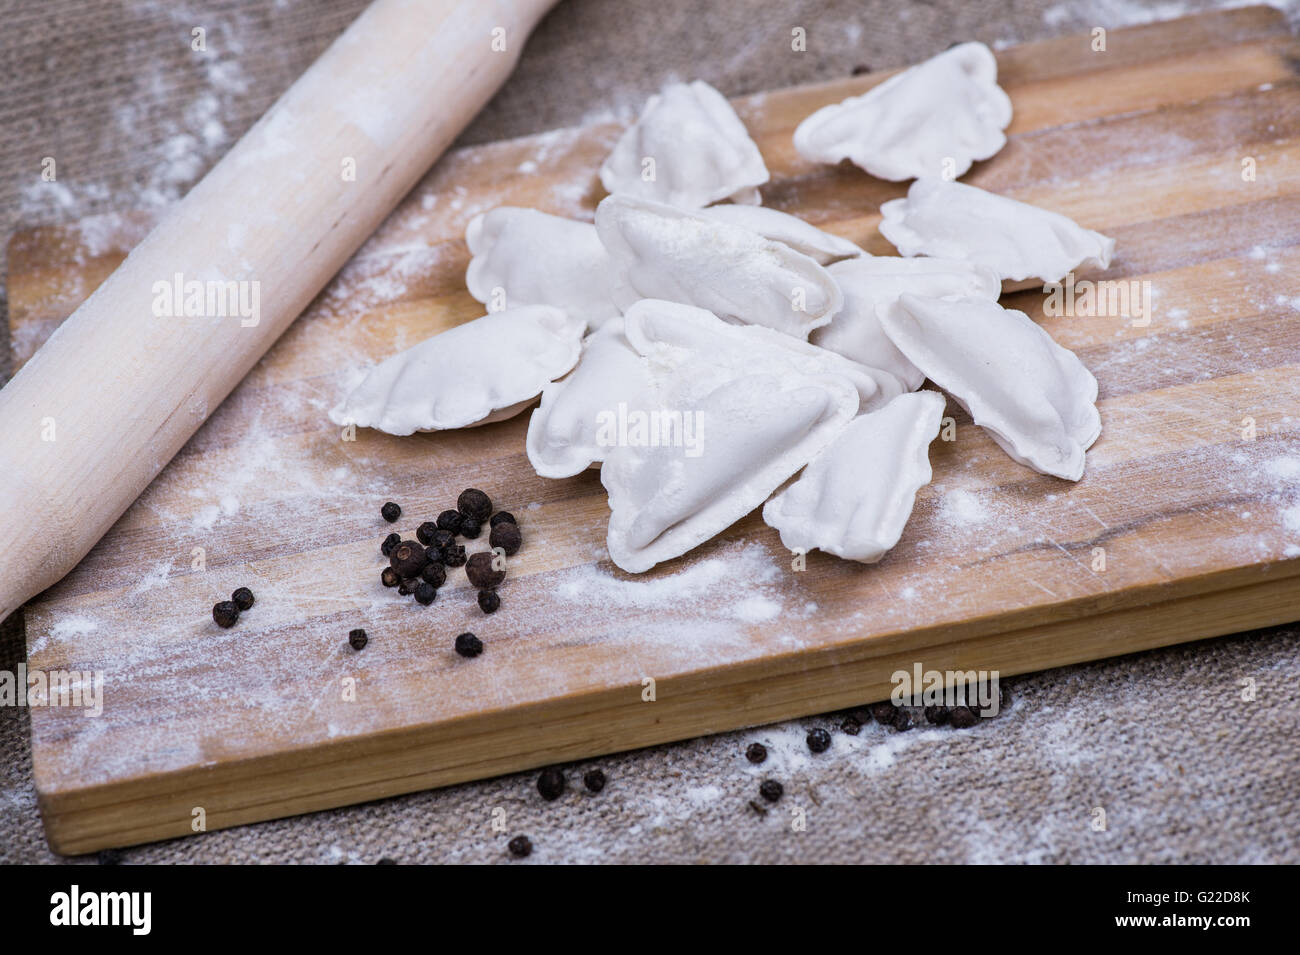 Making of homemade dumplings pastry tortellini or ravioli. Model for home made pasta filled with meat. Preparing organic meal on a wooden desk. Stock Photo